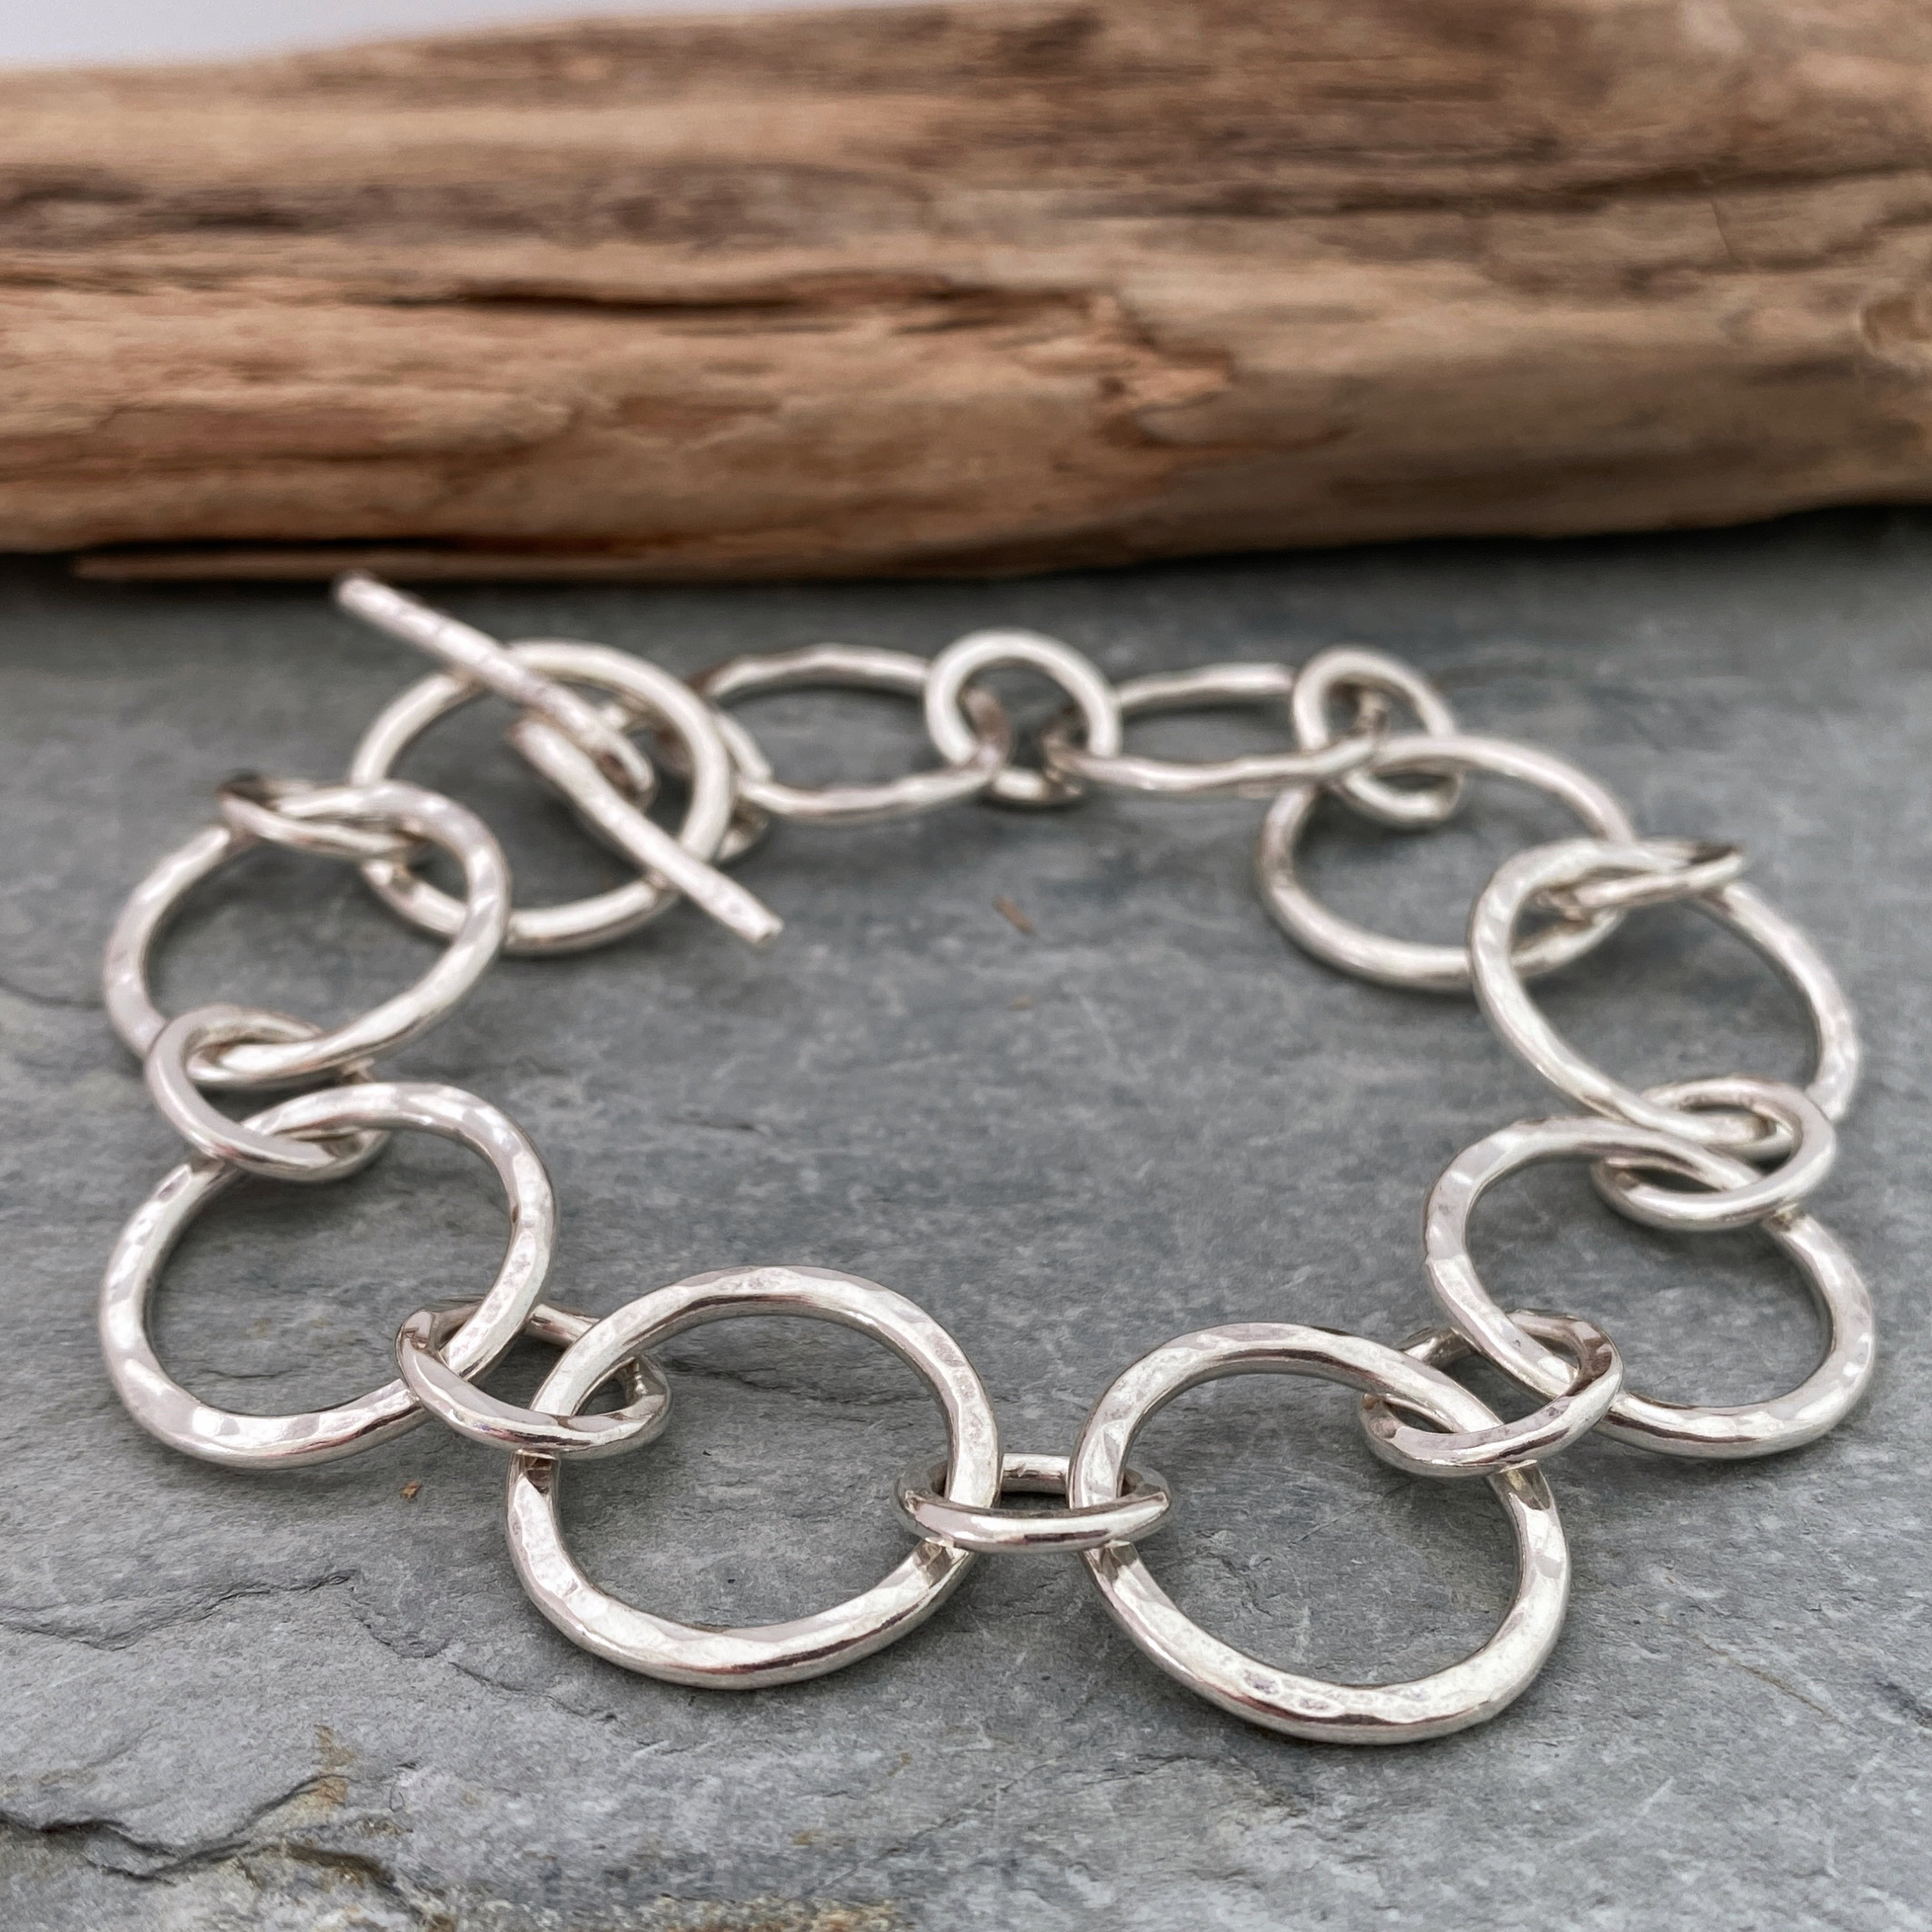 Handmade Chunky Silver Chain Bracelet With Round Links, Hammered Toggle Fastening